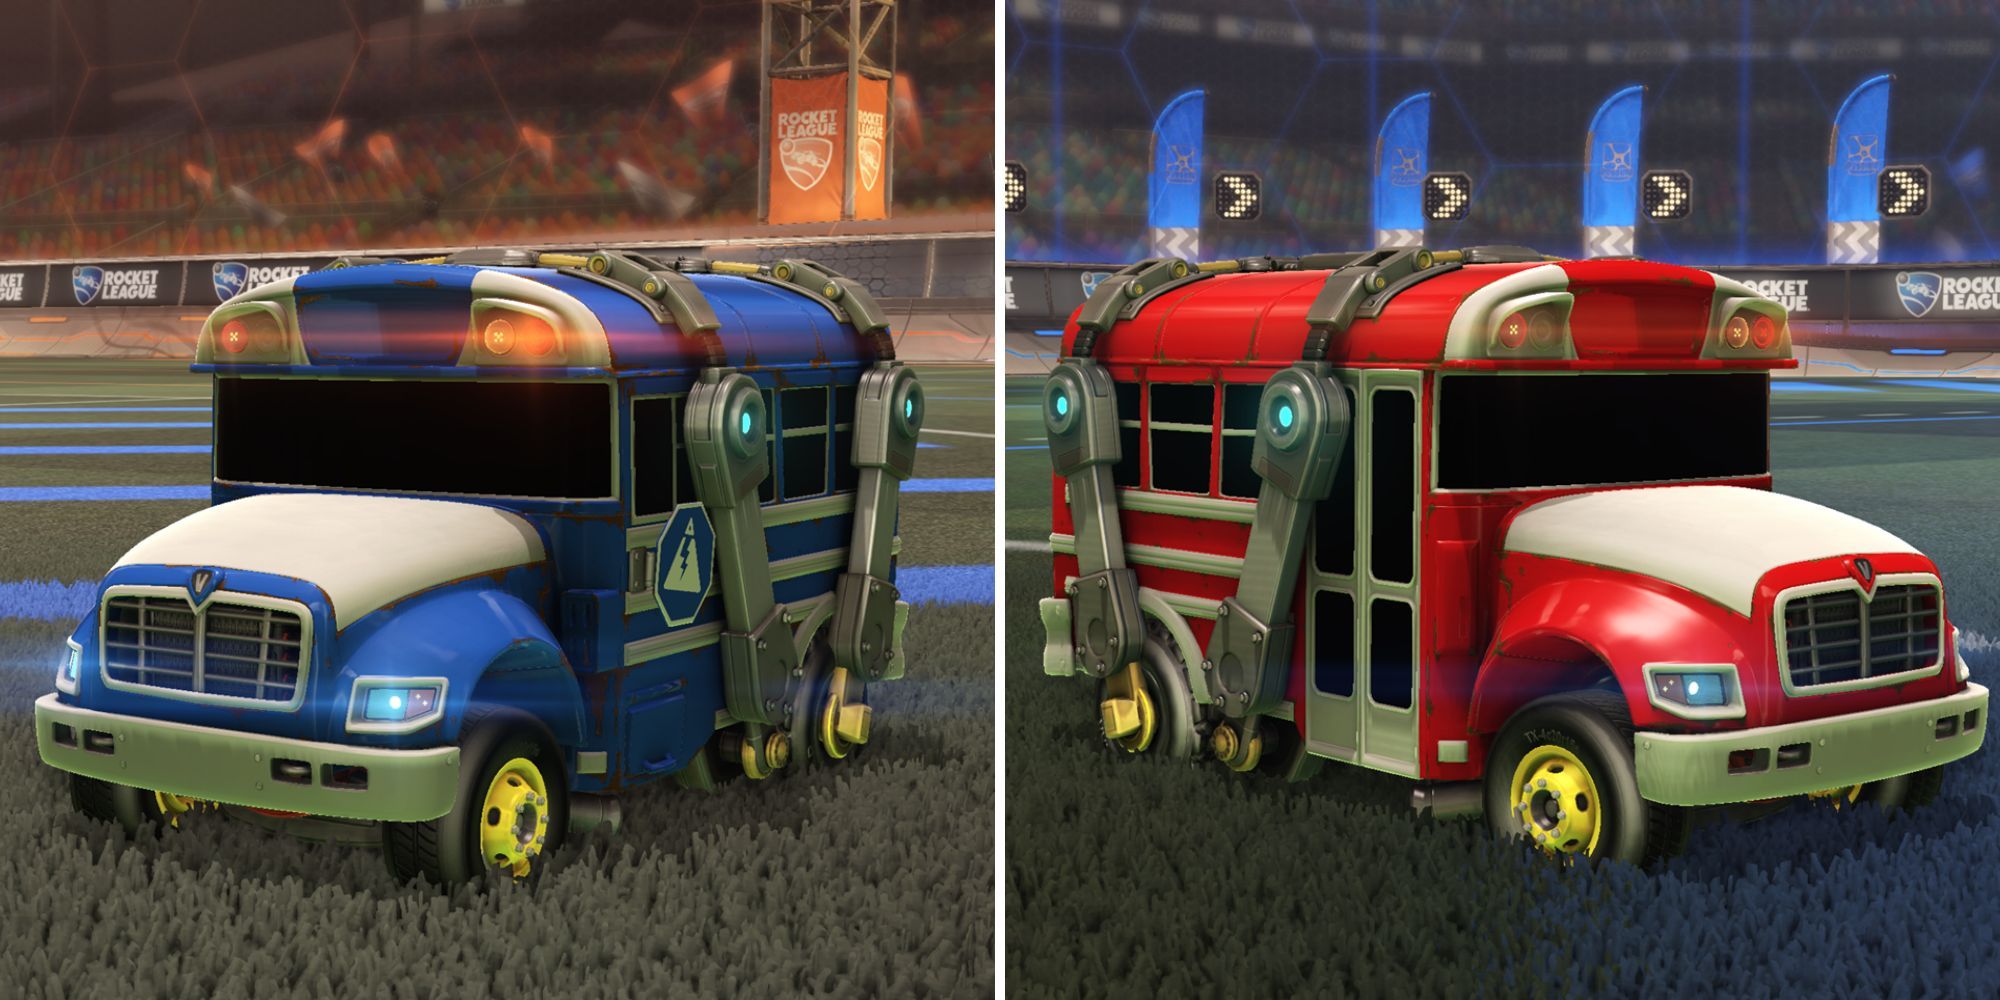 The Battle Bus in the Arena in its red and blue variants in Rocket League.